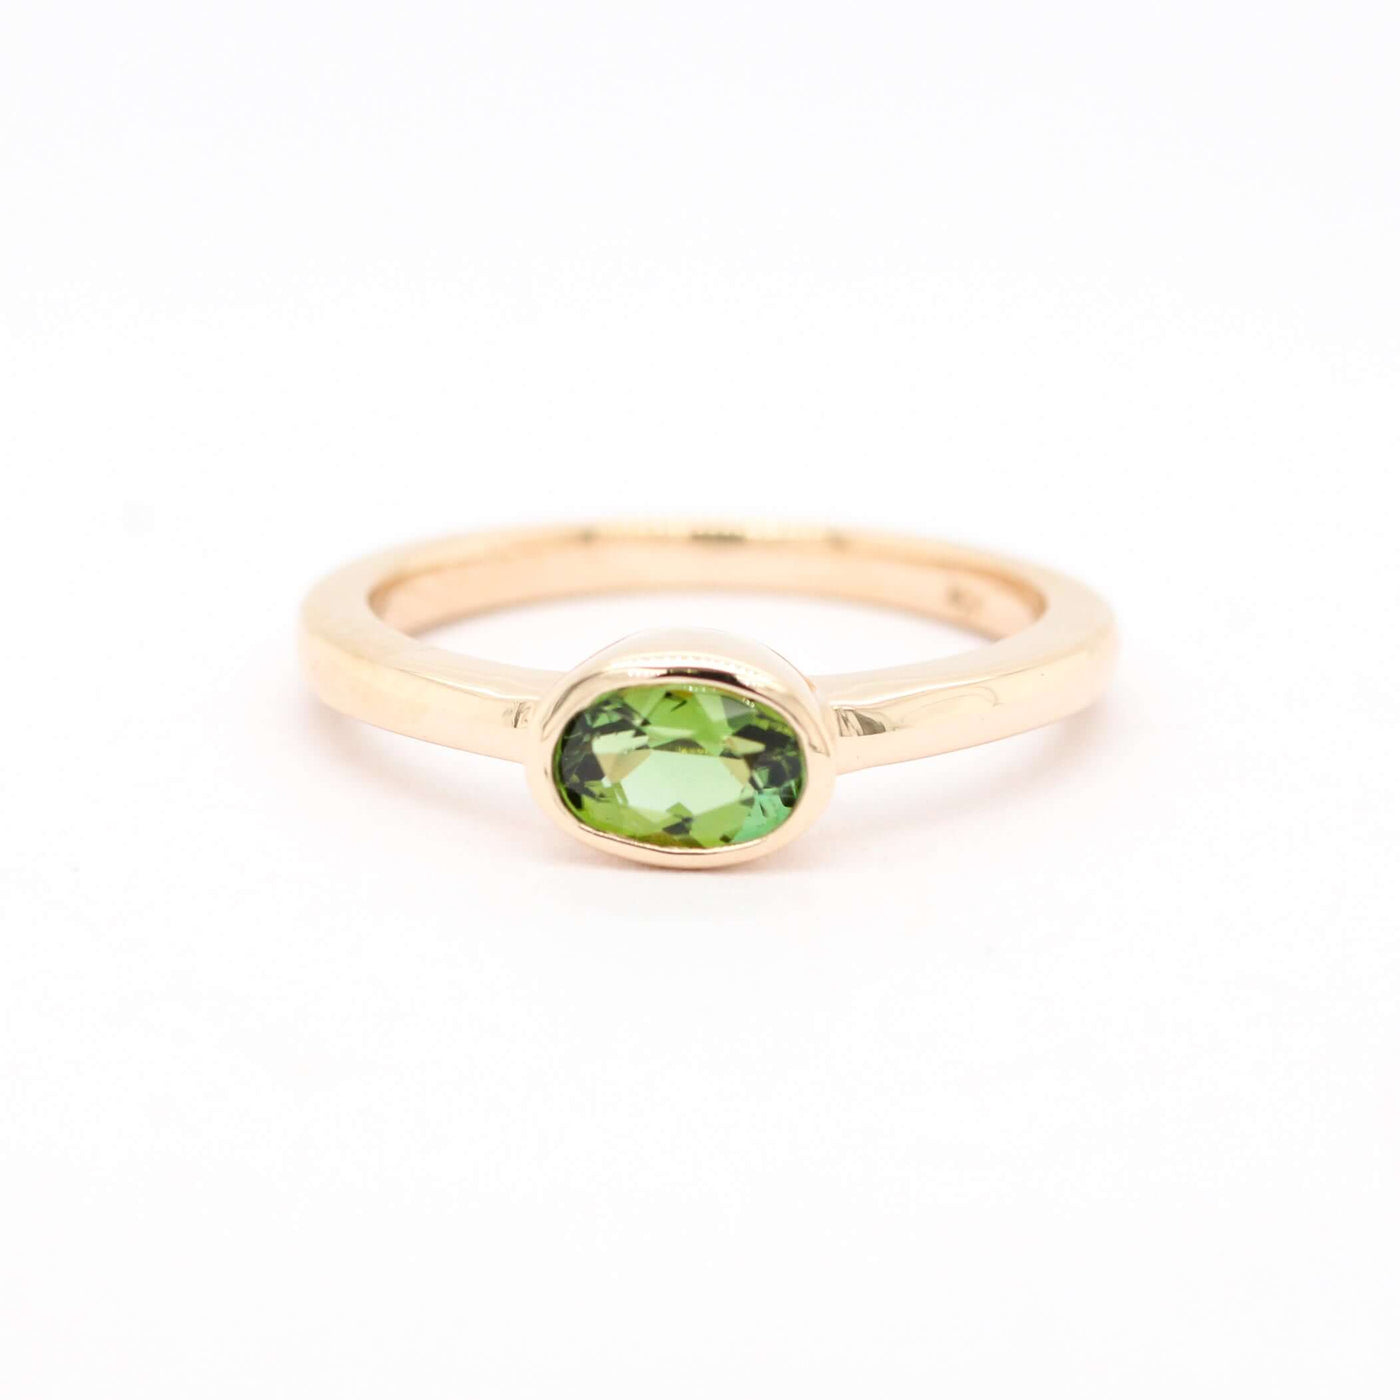 14KY .61 CT OVAL GREEN TOURMALINE RING